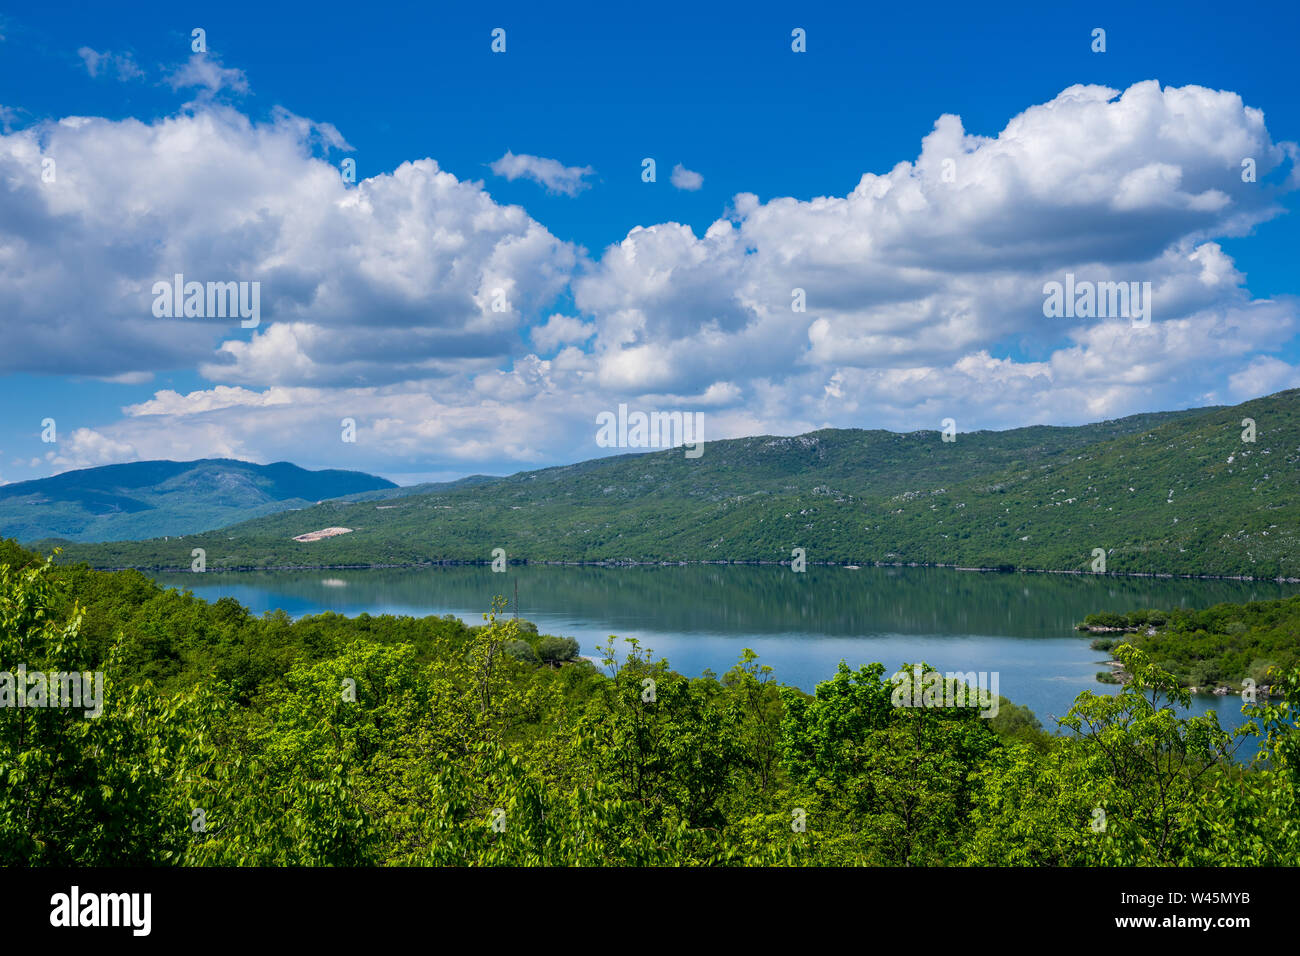 Montenegro, Lake krupac, a artificial lake next to niksic city surrounded by green trees and forest nature landscape reflecting in silent water with b Stock Photo